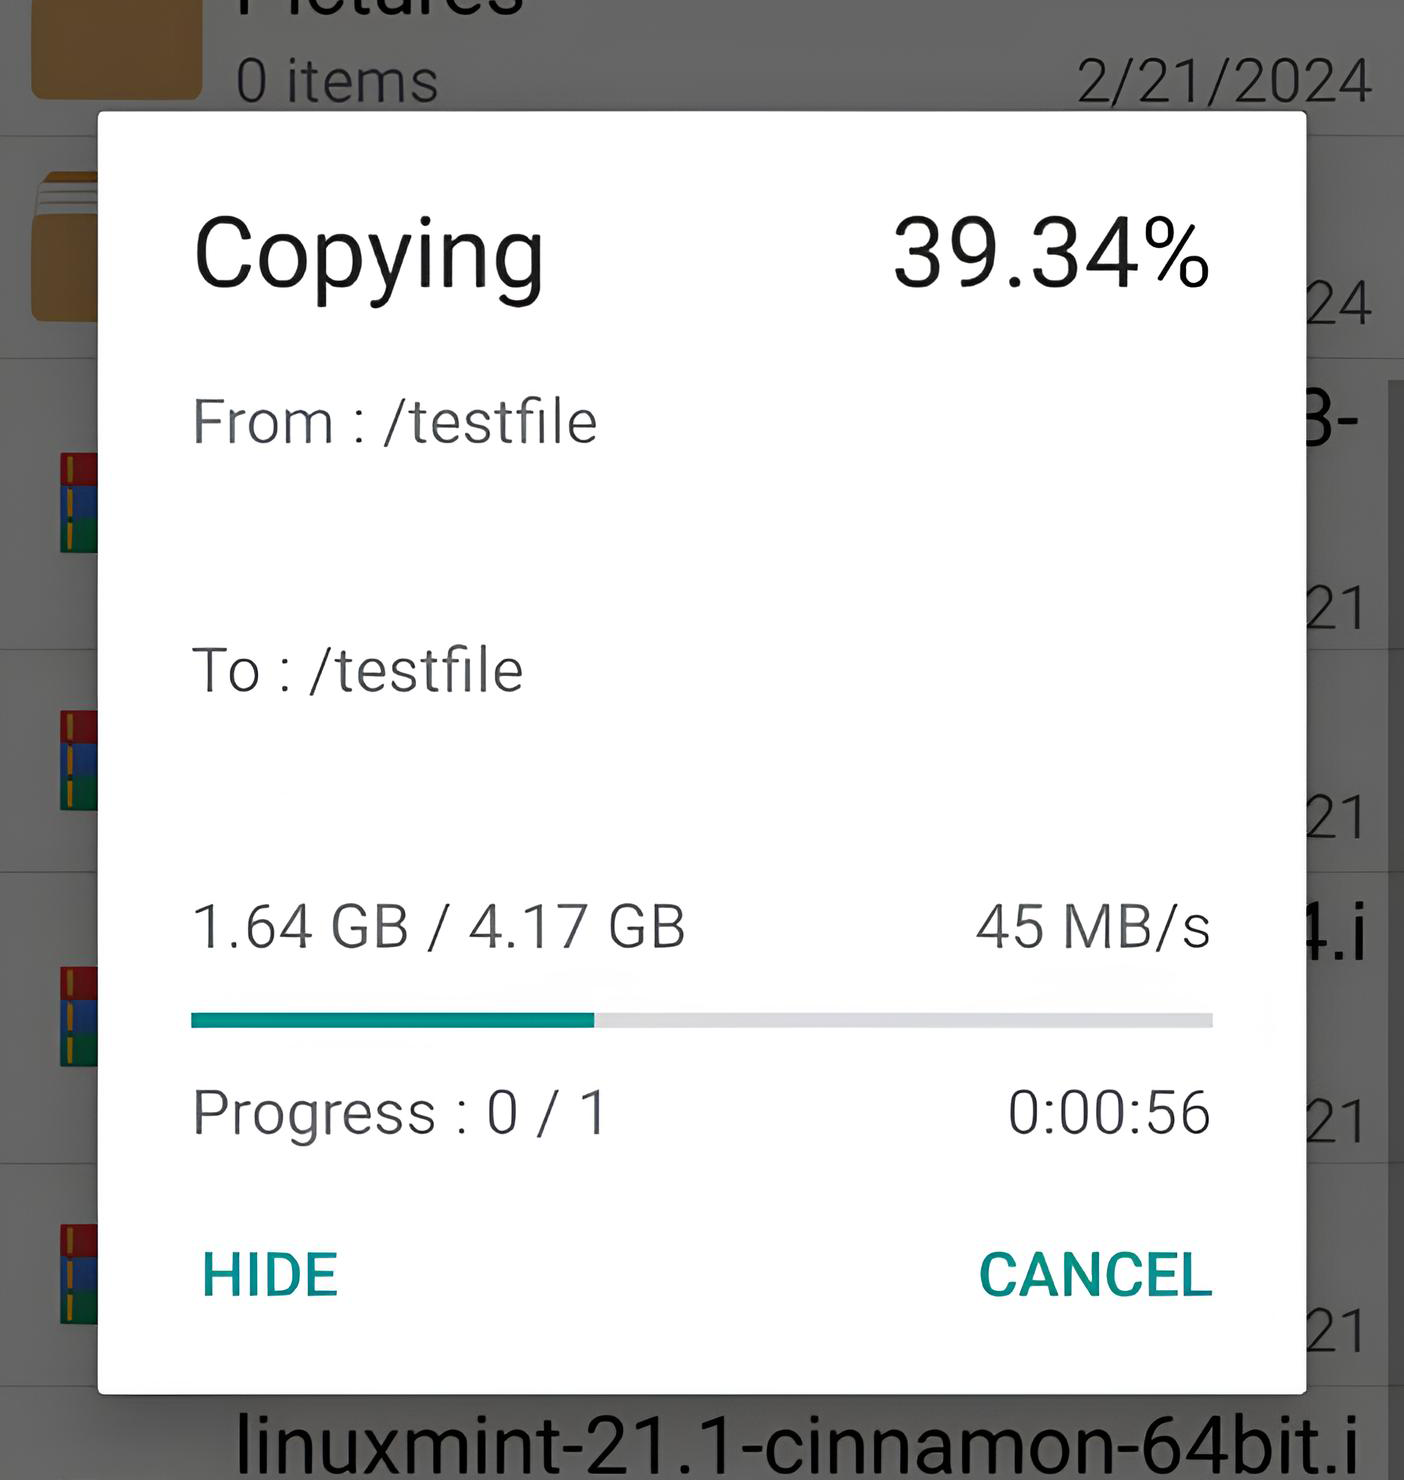 File transfer from the Android phone to the portable drive in progress.